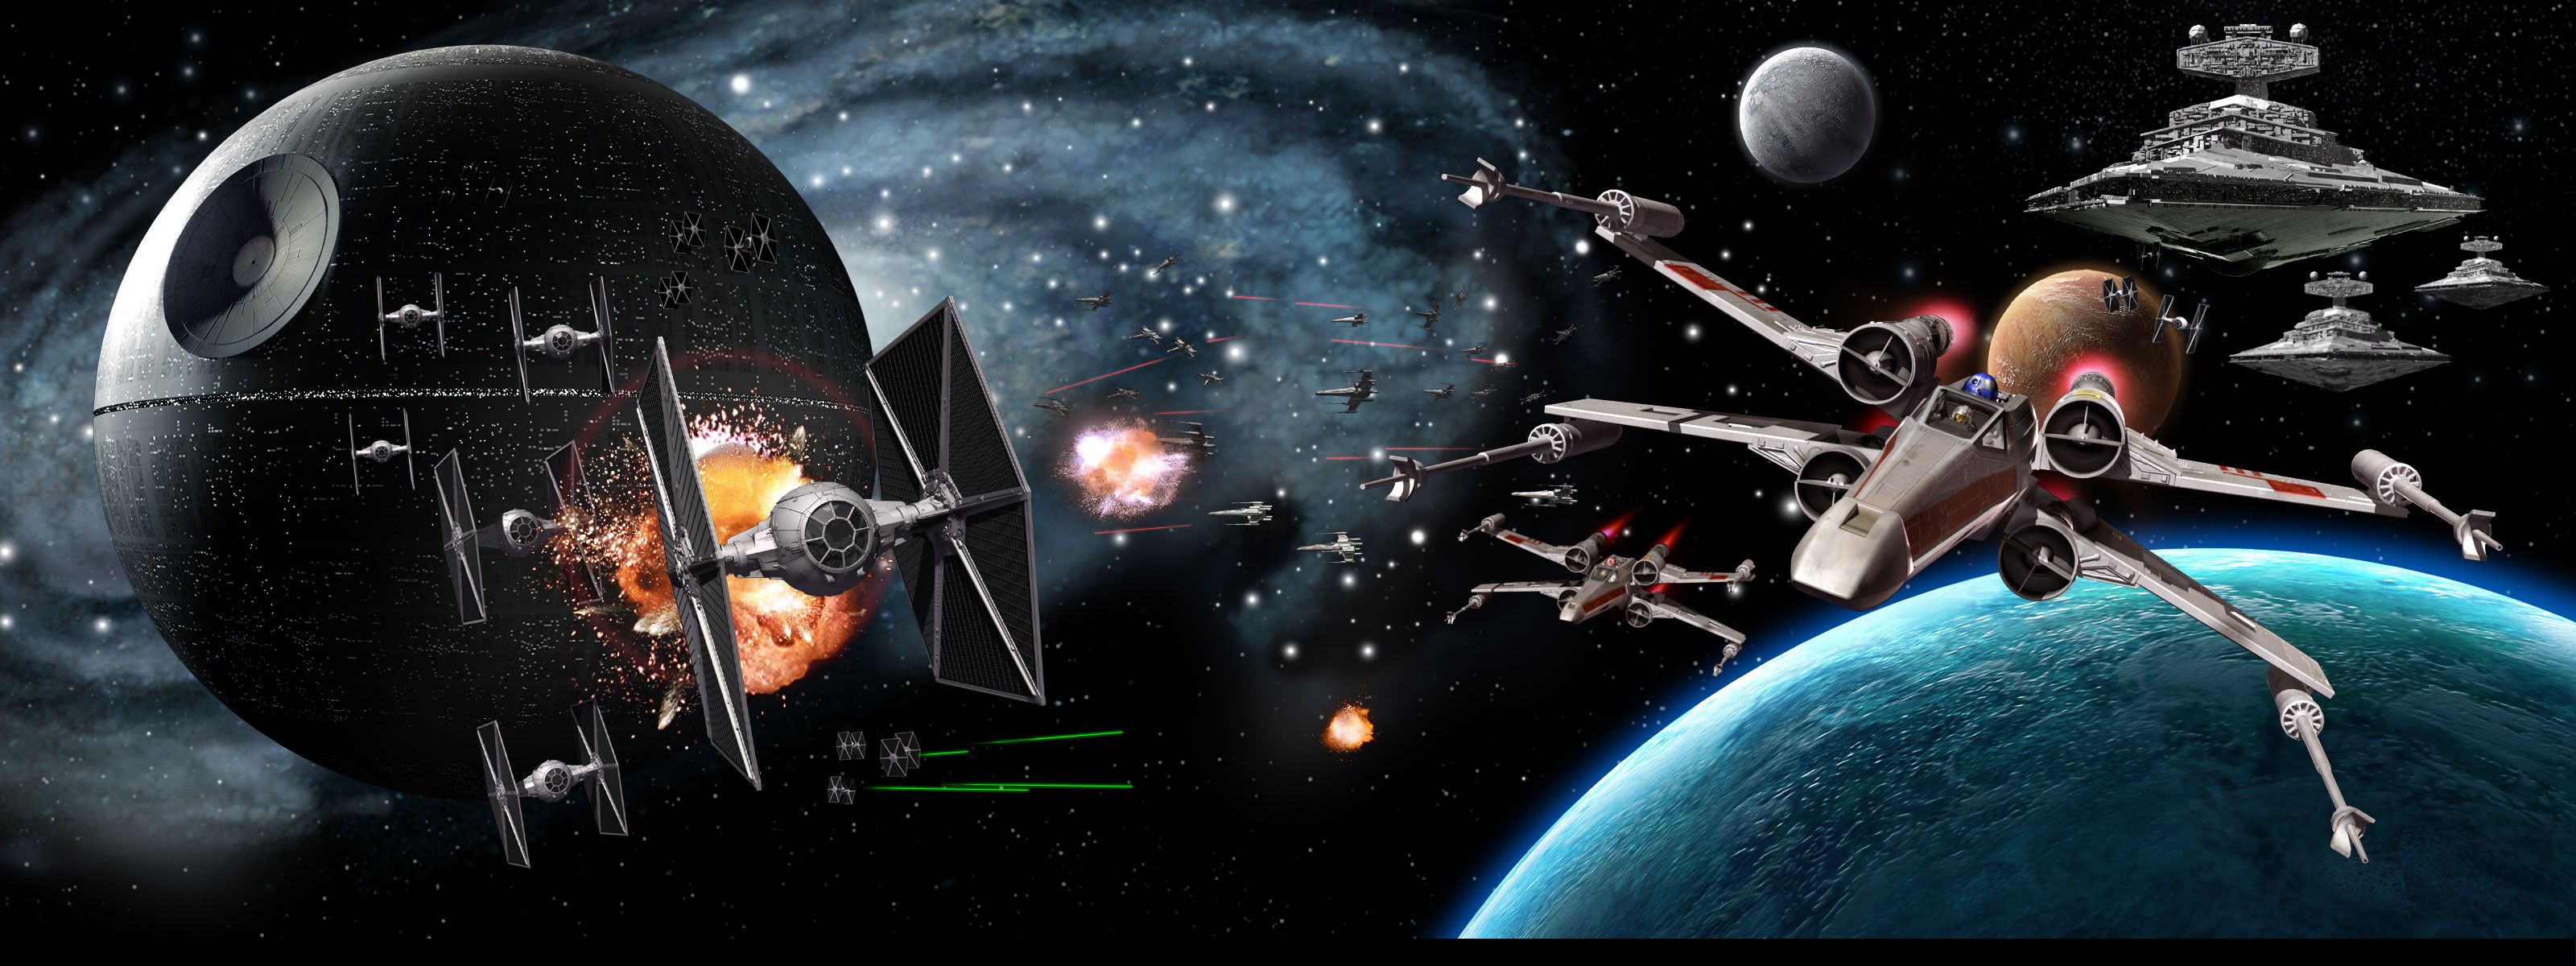 star, Wars, Multi, Monitor, Sci, Fi, Science, Battle, Death, Star, Outer, Space, Vehicles, Spaceships, Spacecrafts Wallpaper